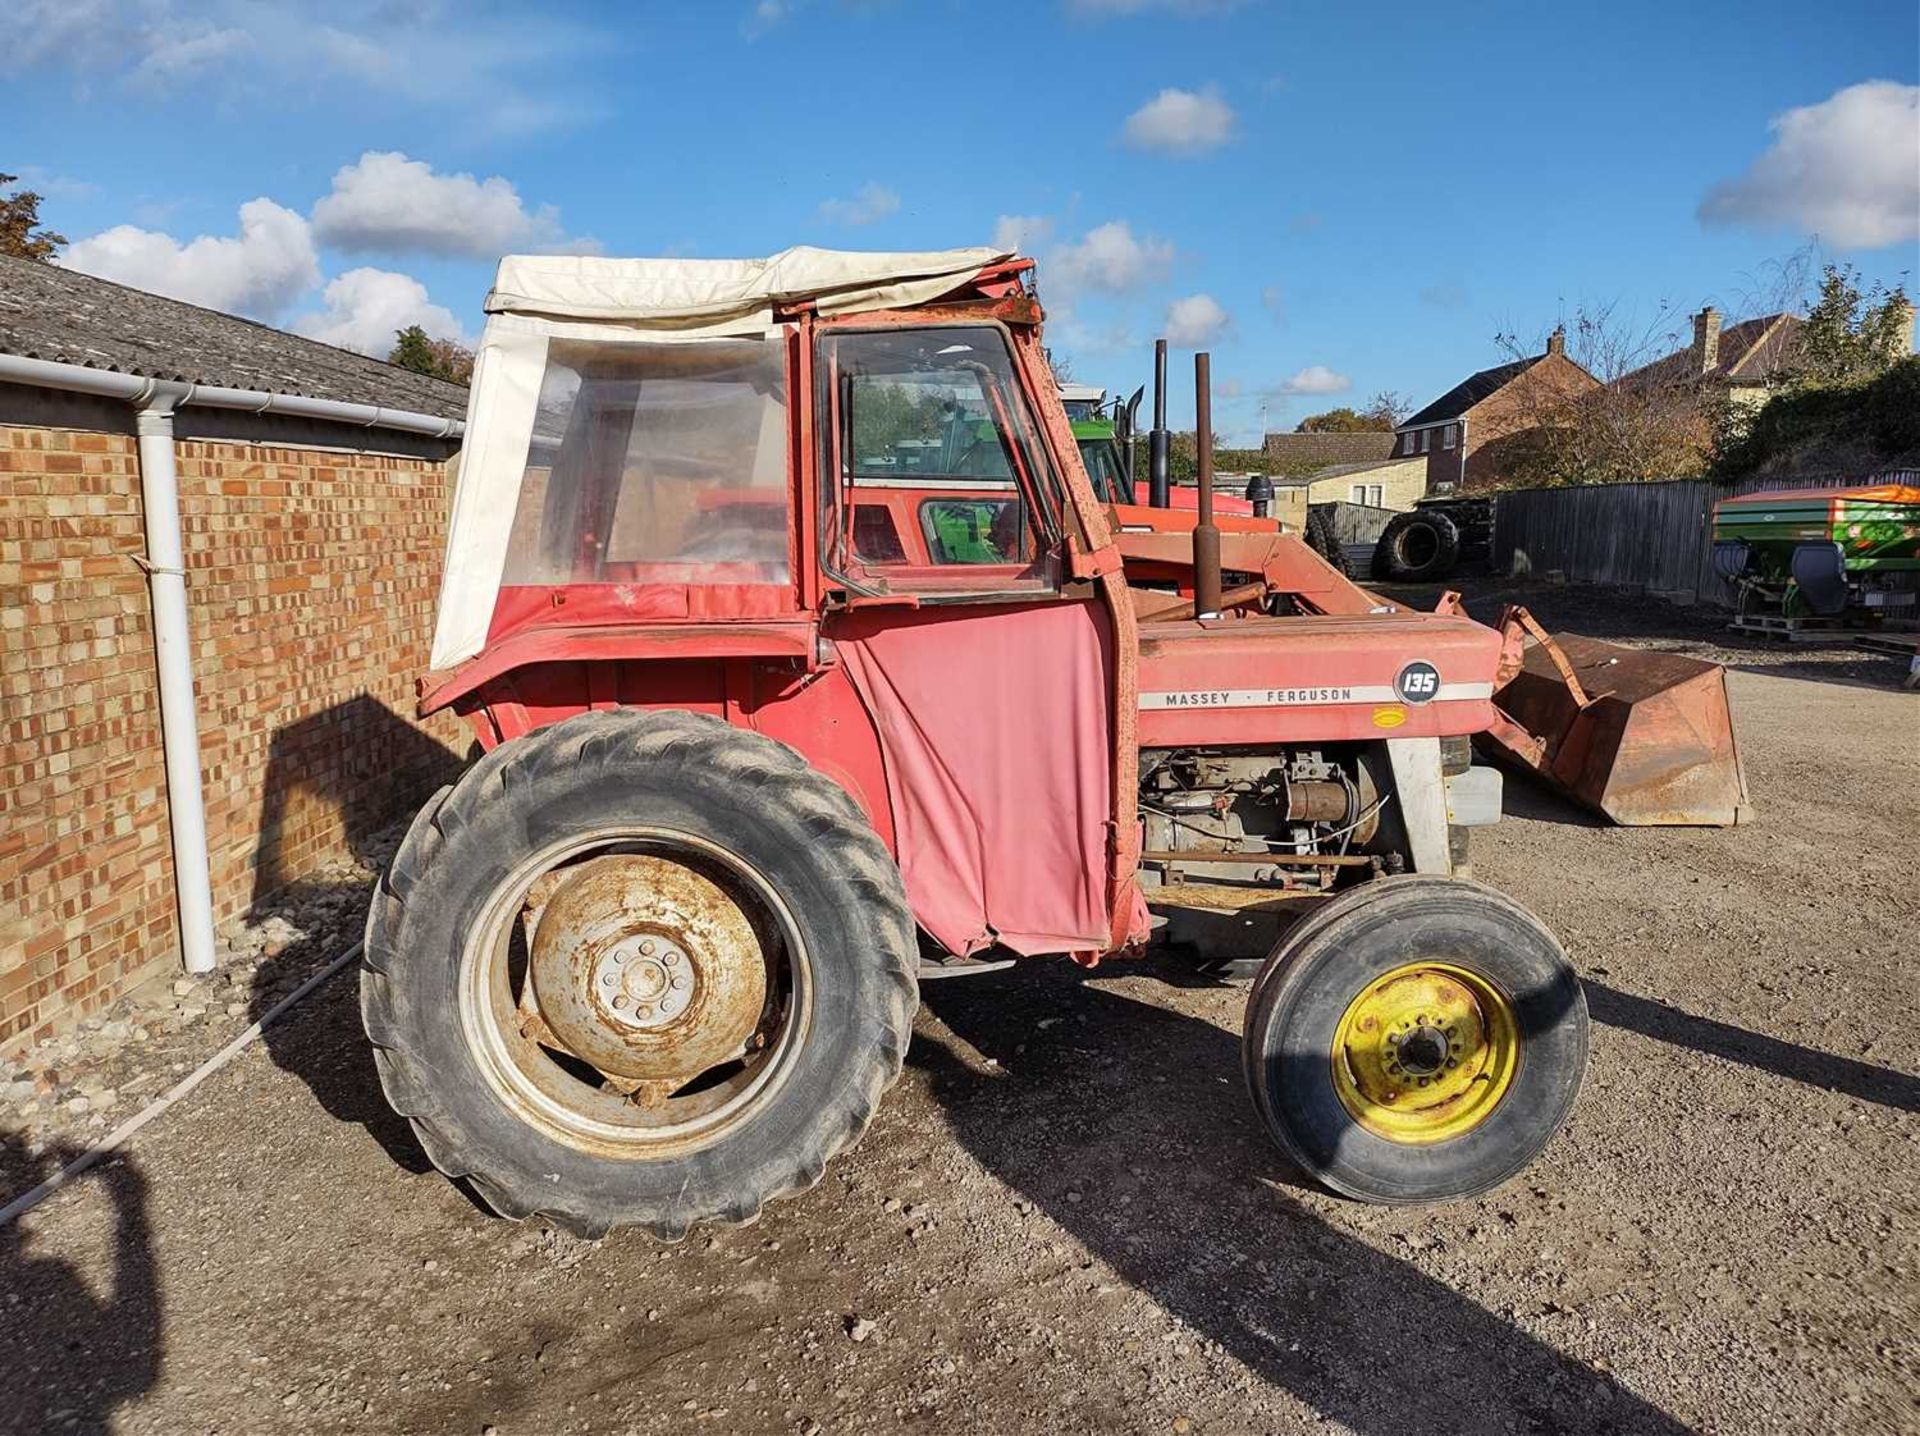 Massey Ferguson 135 Tractor with Original Front Wheels. Pickup Hitch. 2,284 Hrs. Reg: 7JE 705X - Image 3 of 10